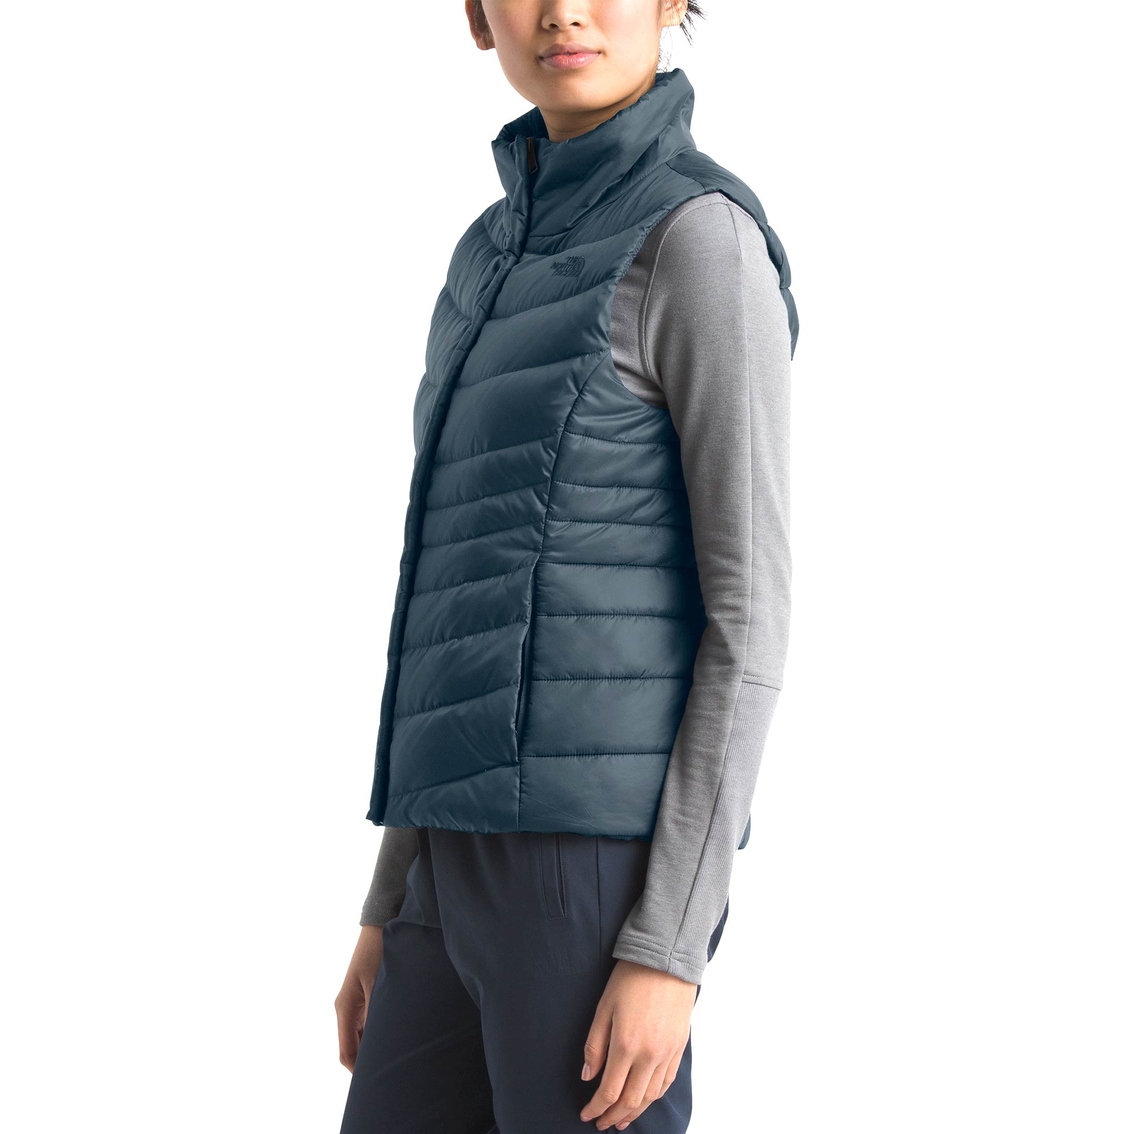 The North Face Aconcagua Vest - Image 3 of 4